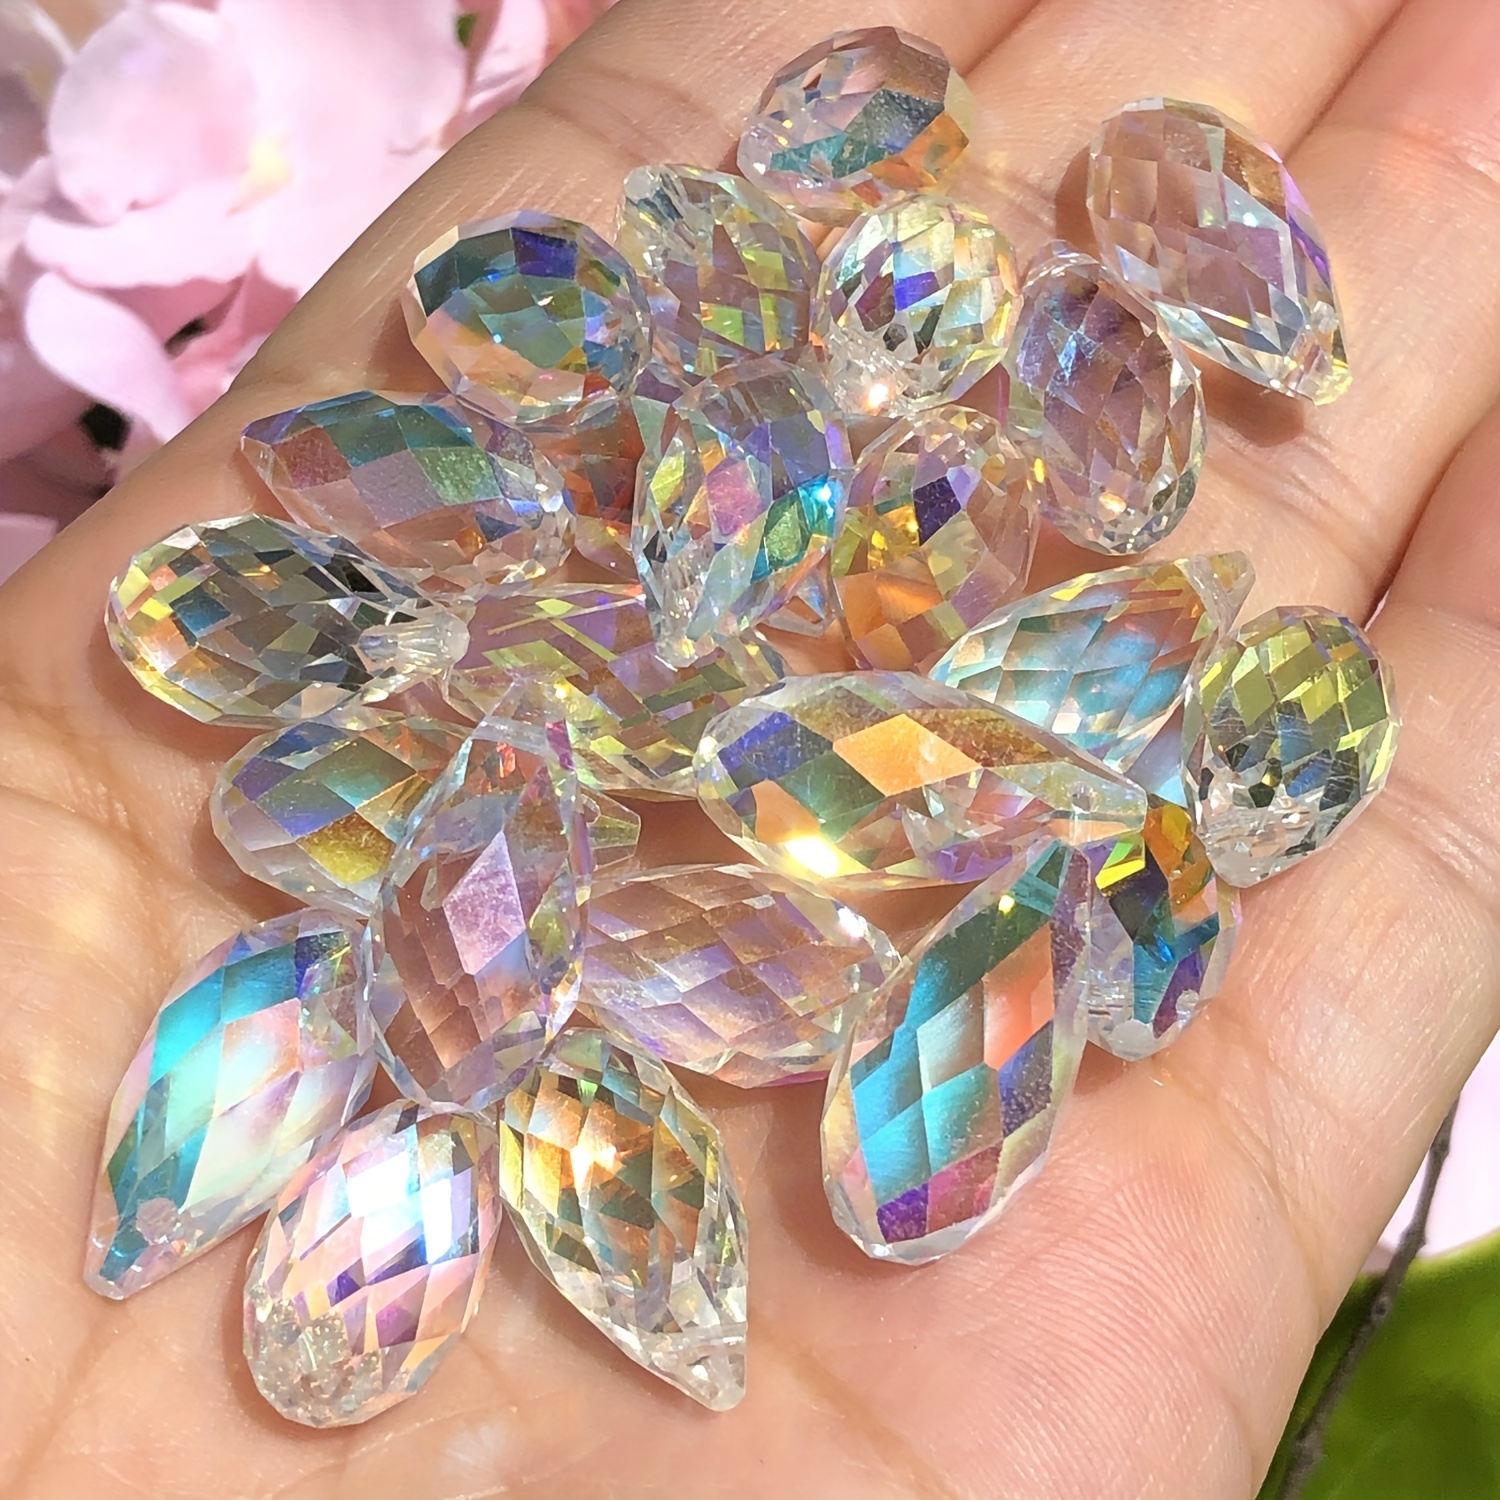 

Boutique High-quality Faceted Water Drop Austrian Crystal Pendant Loose Beads For Diy Bracelet Necklace Earrings Handicrafts Jewelry Making Supplies